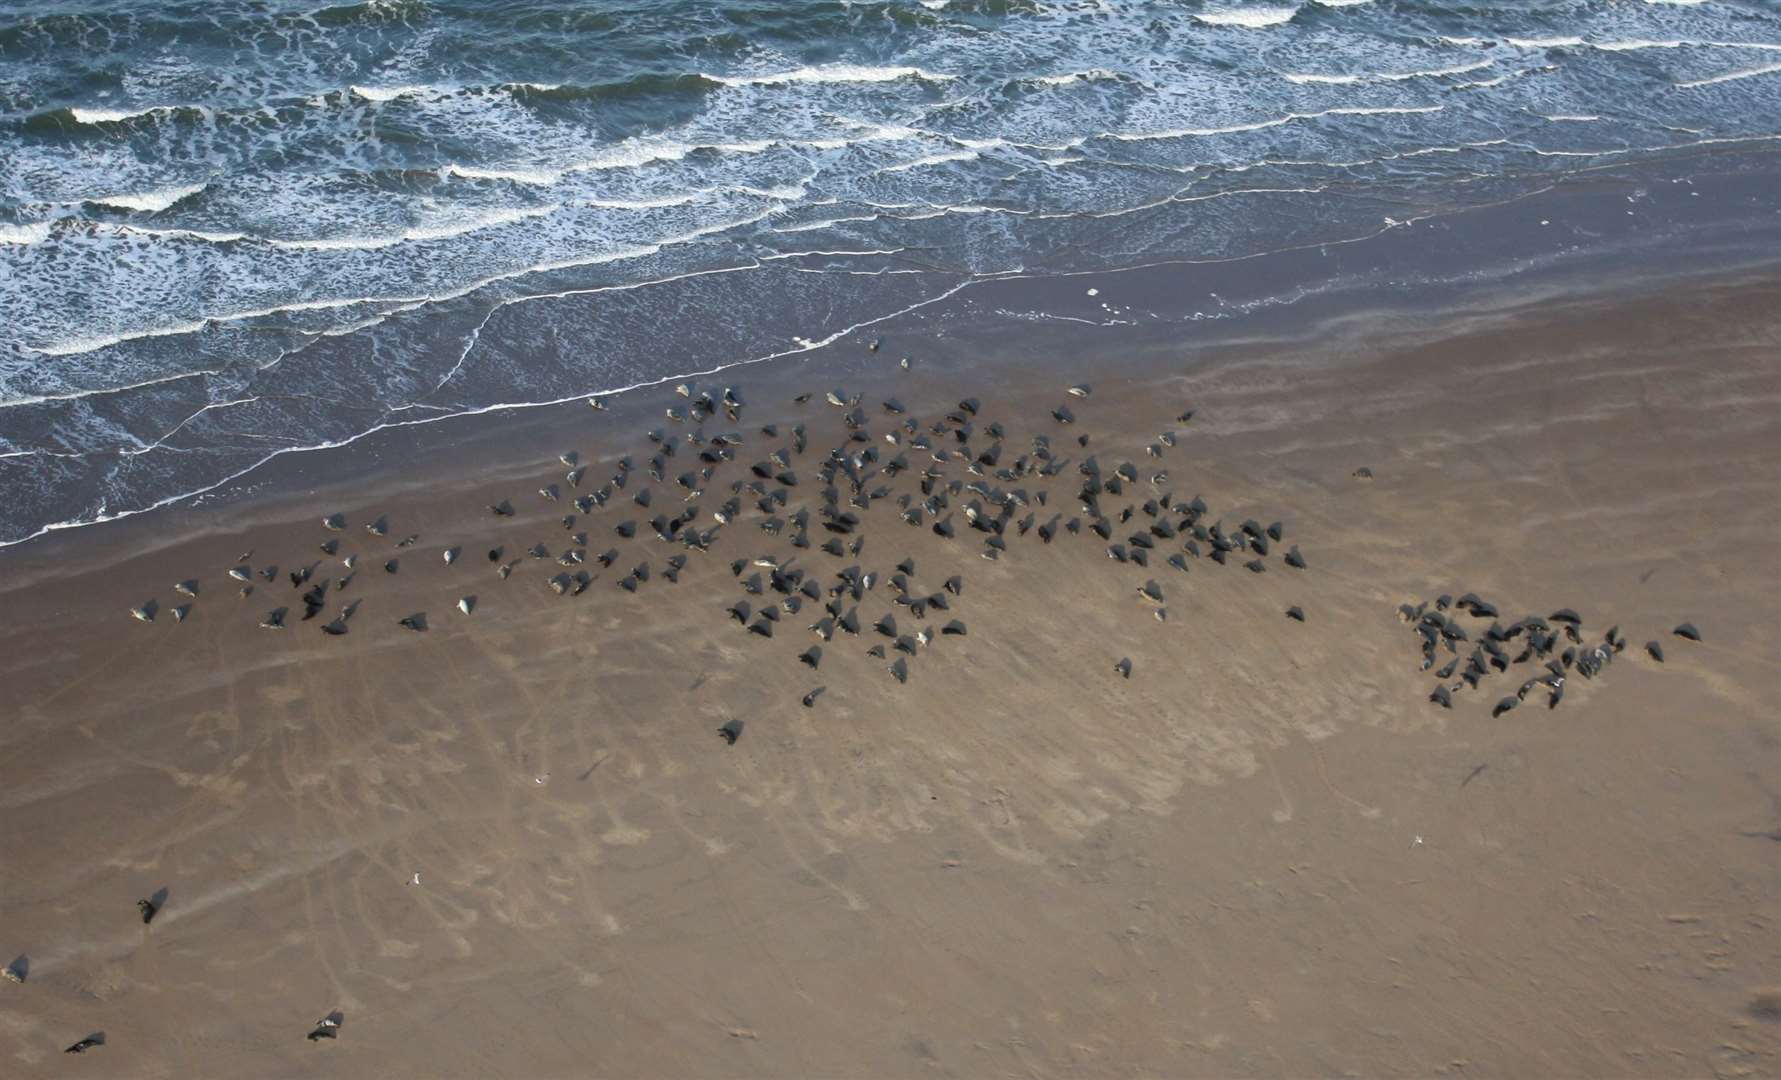 Seals at Goodwin Sands in Deal. Picture: Geoff Hall